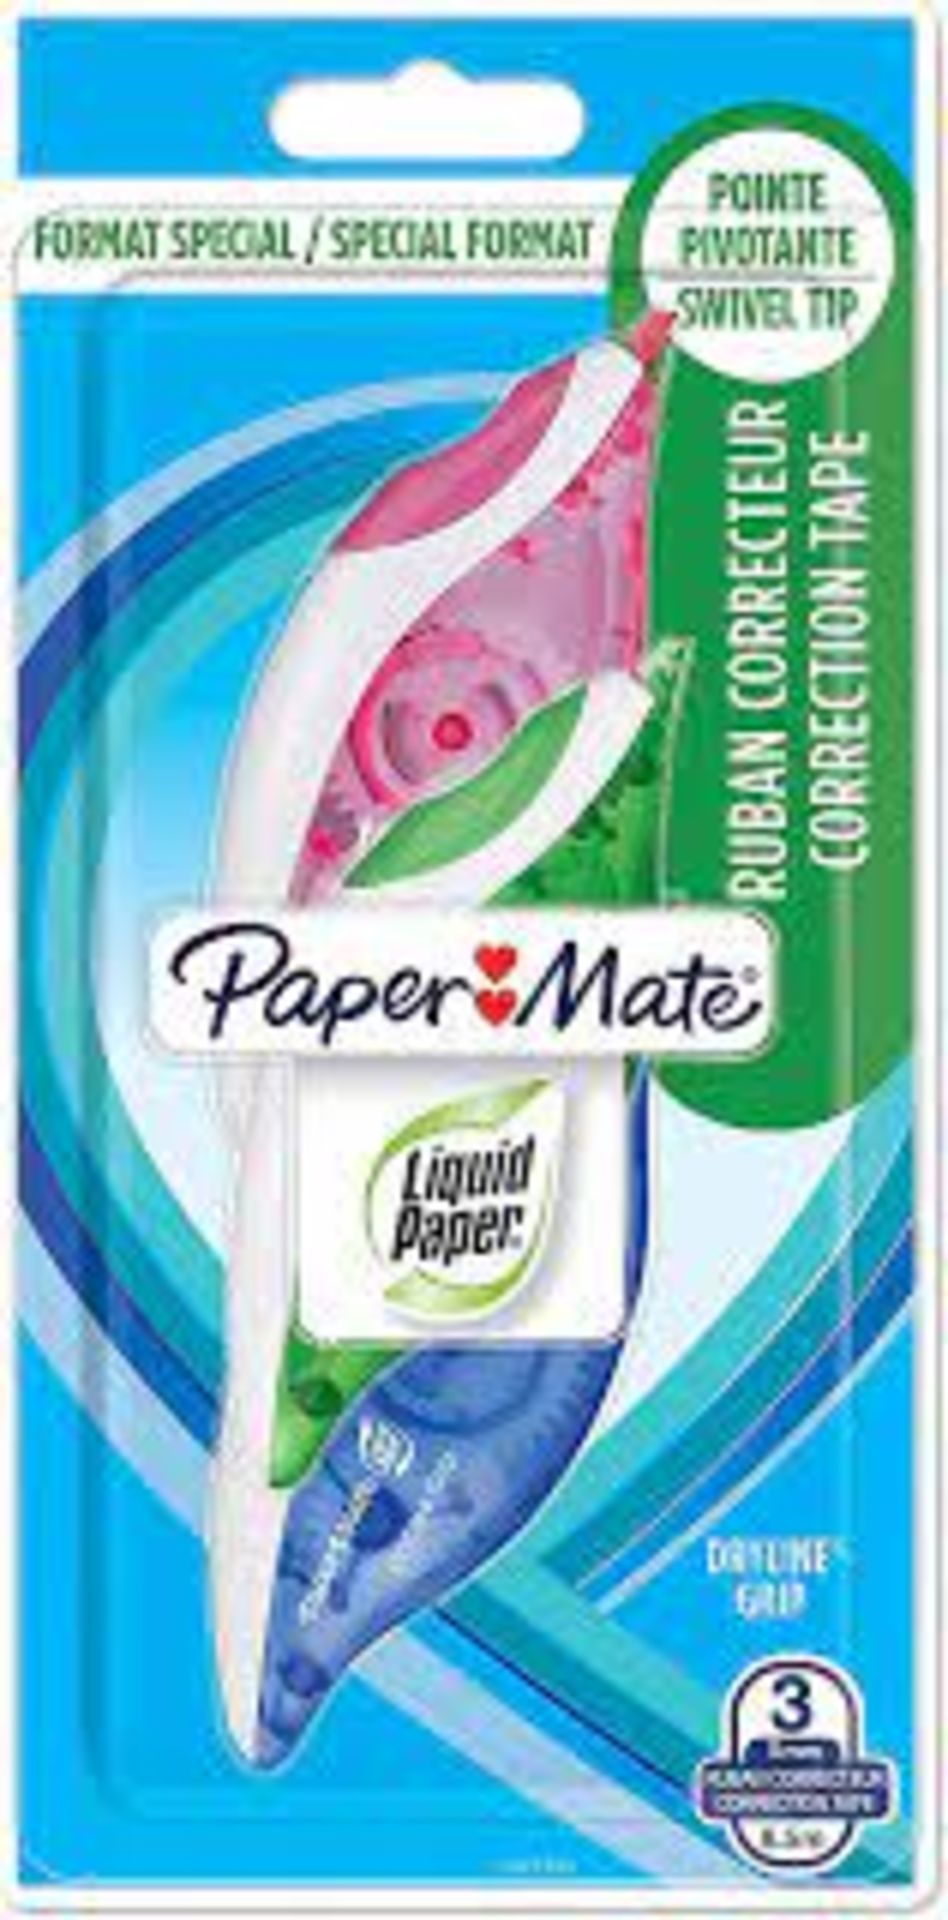 50 X BRAND NEW PAPERMATE PACKS OF 3 CORRECTION TAPE ROLLS INSL